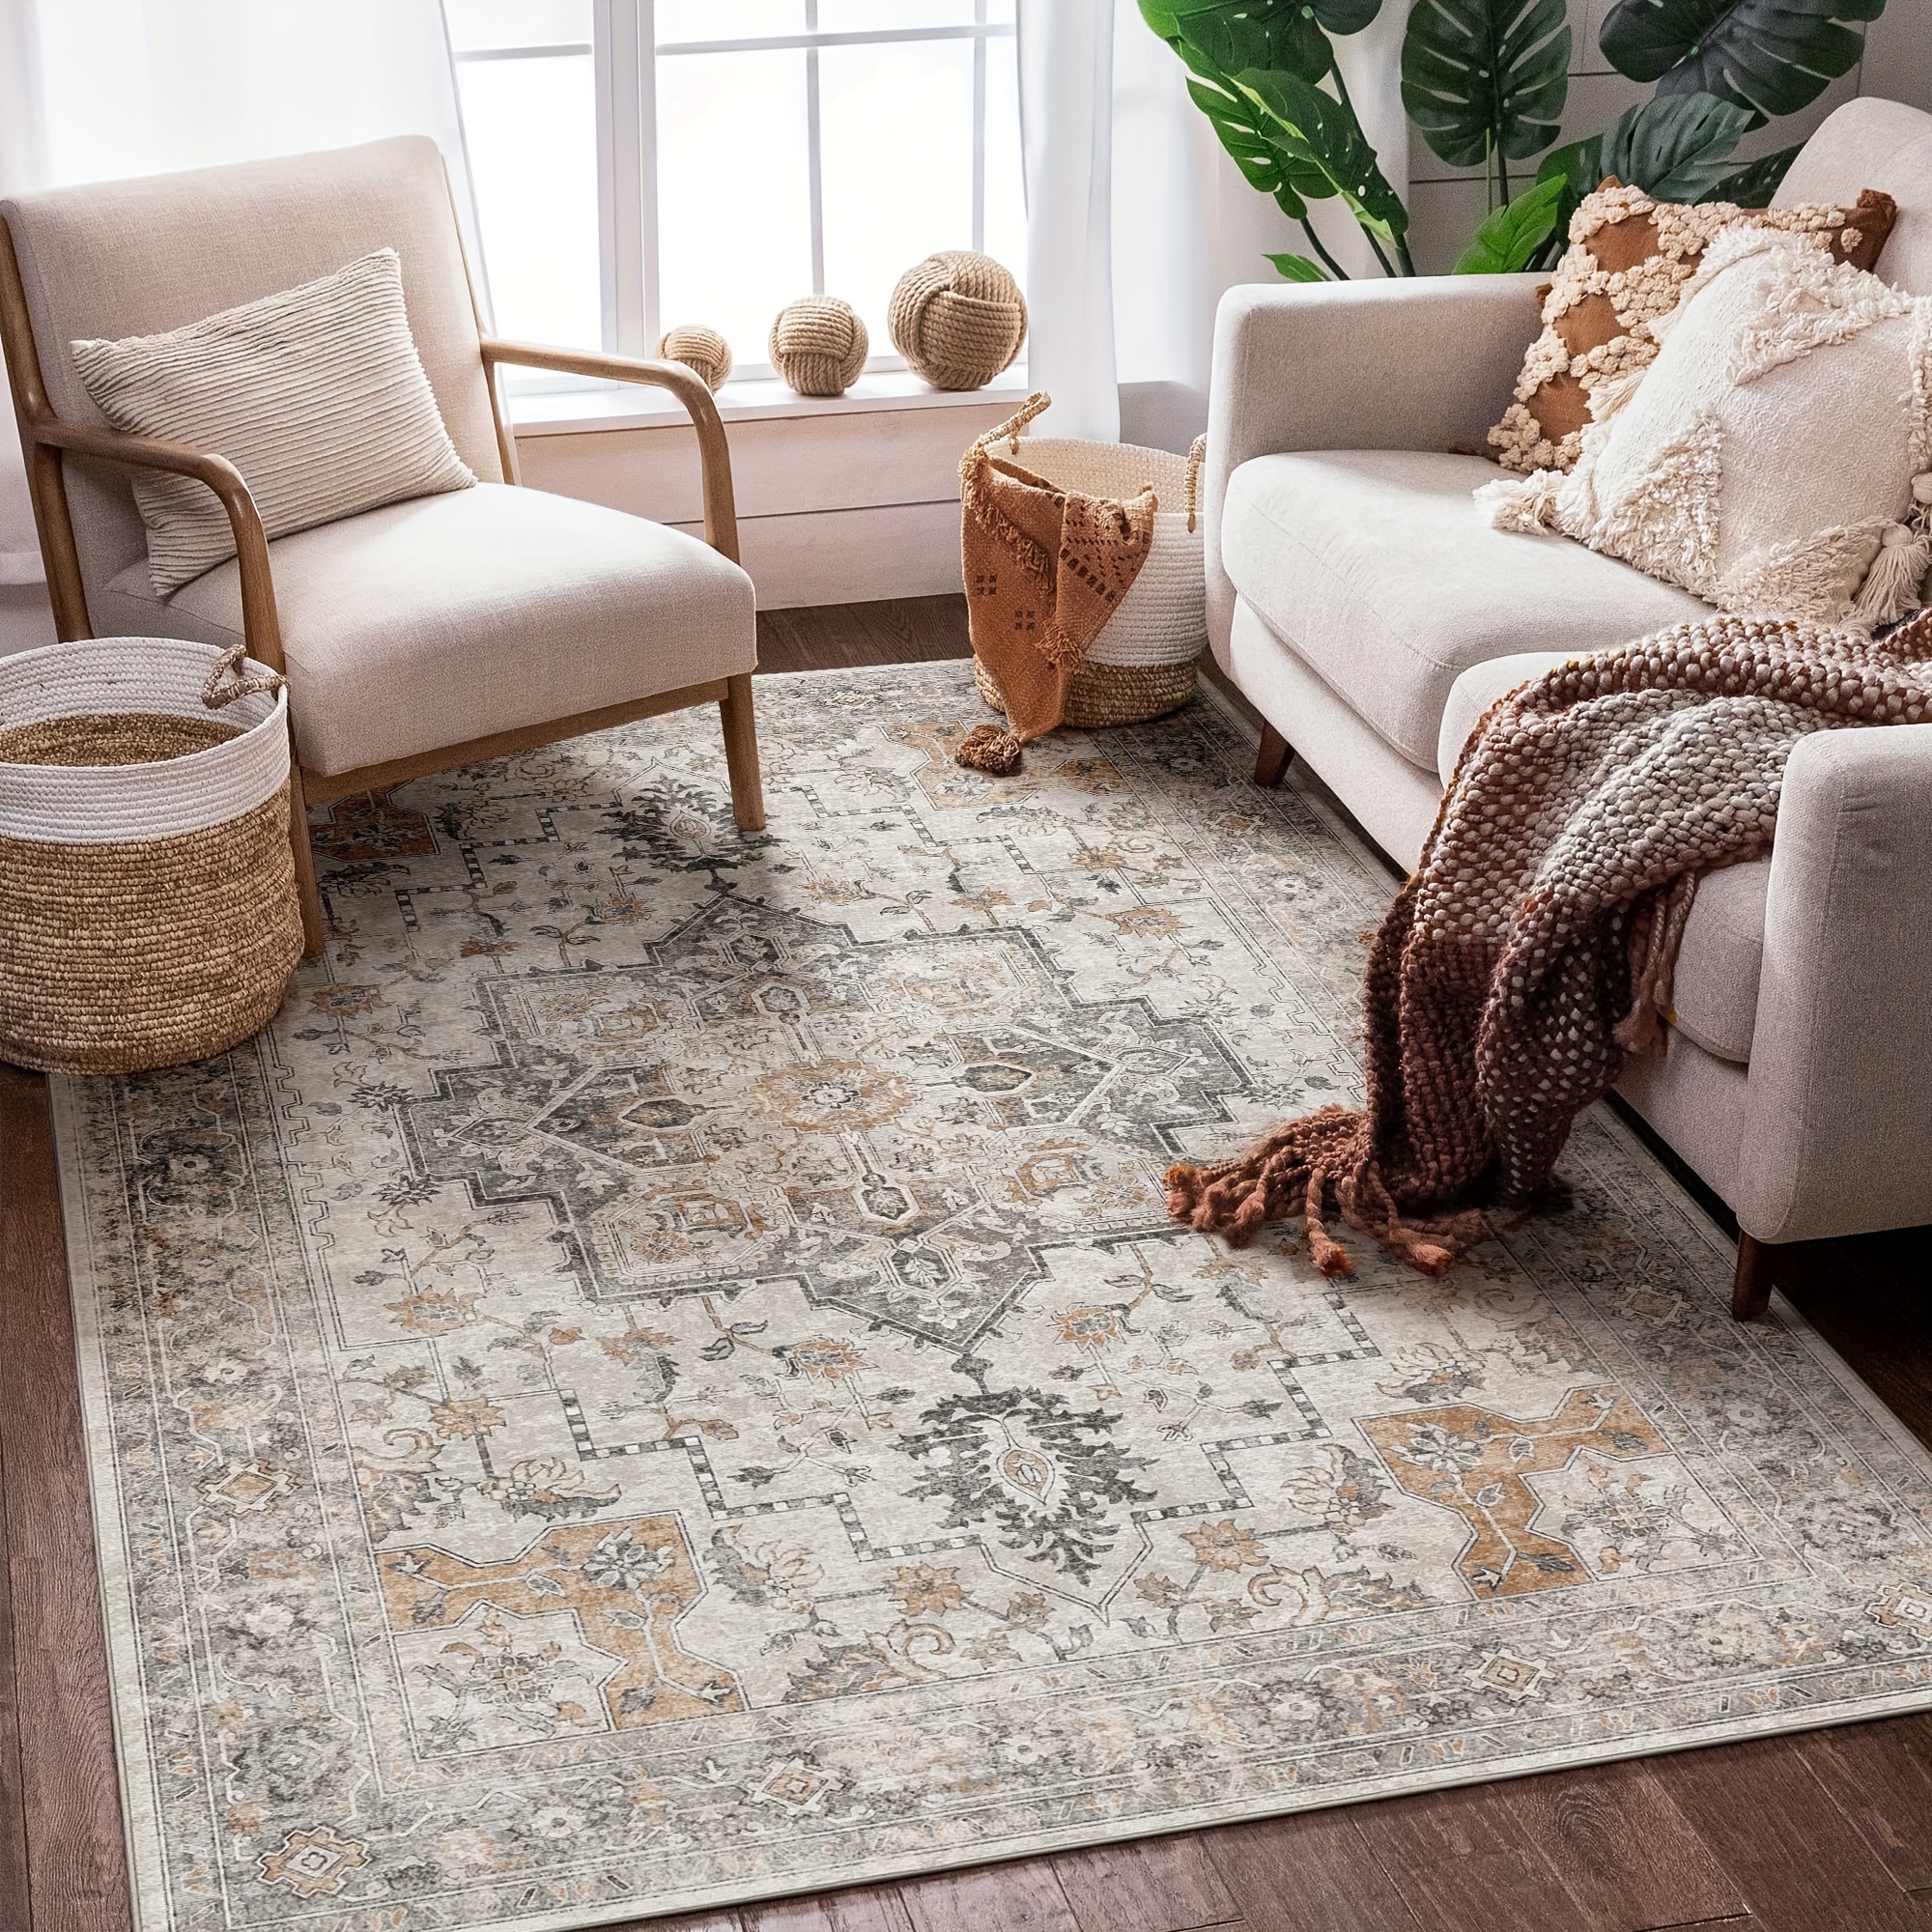 

1pc, Area Rugs For Living Room, Machine Washable Non Slip Vintage Retro Rugs, Low Pile Lightweight Chenille Print Rug For Bedroom, Dining Room, Home Office, Light Taupe Brown